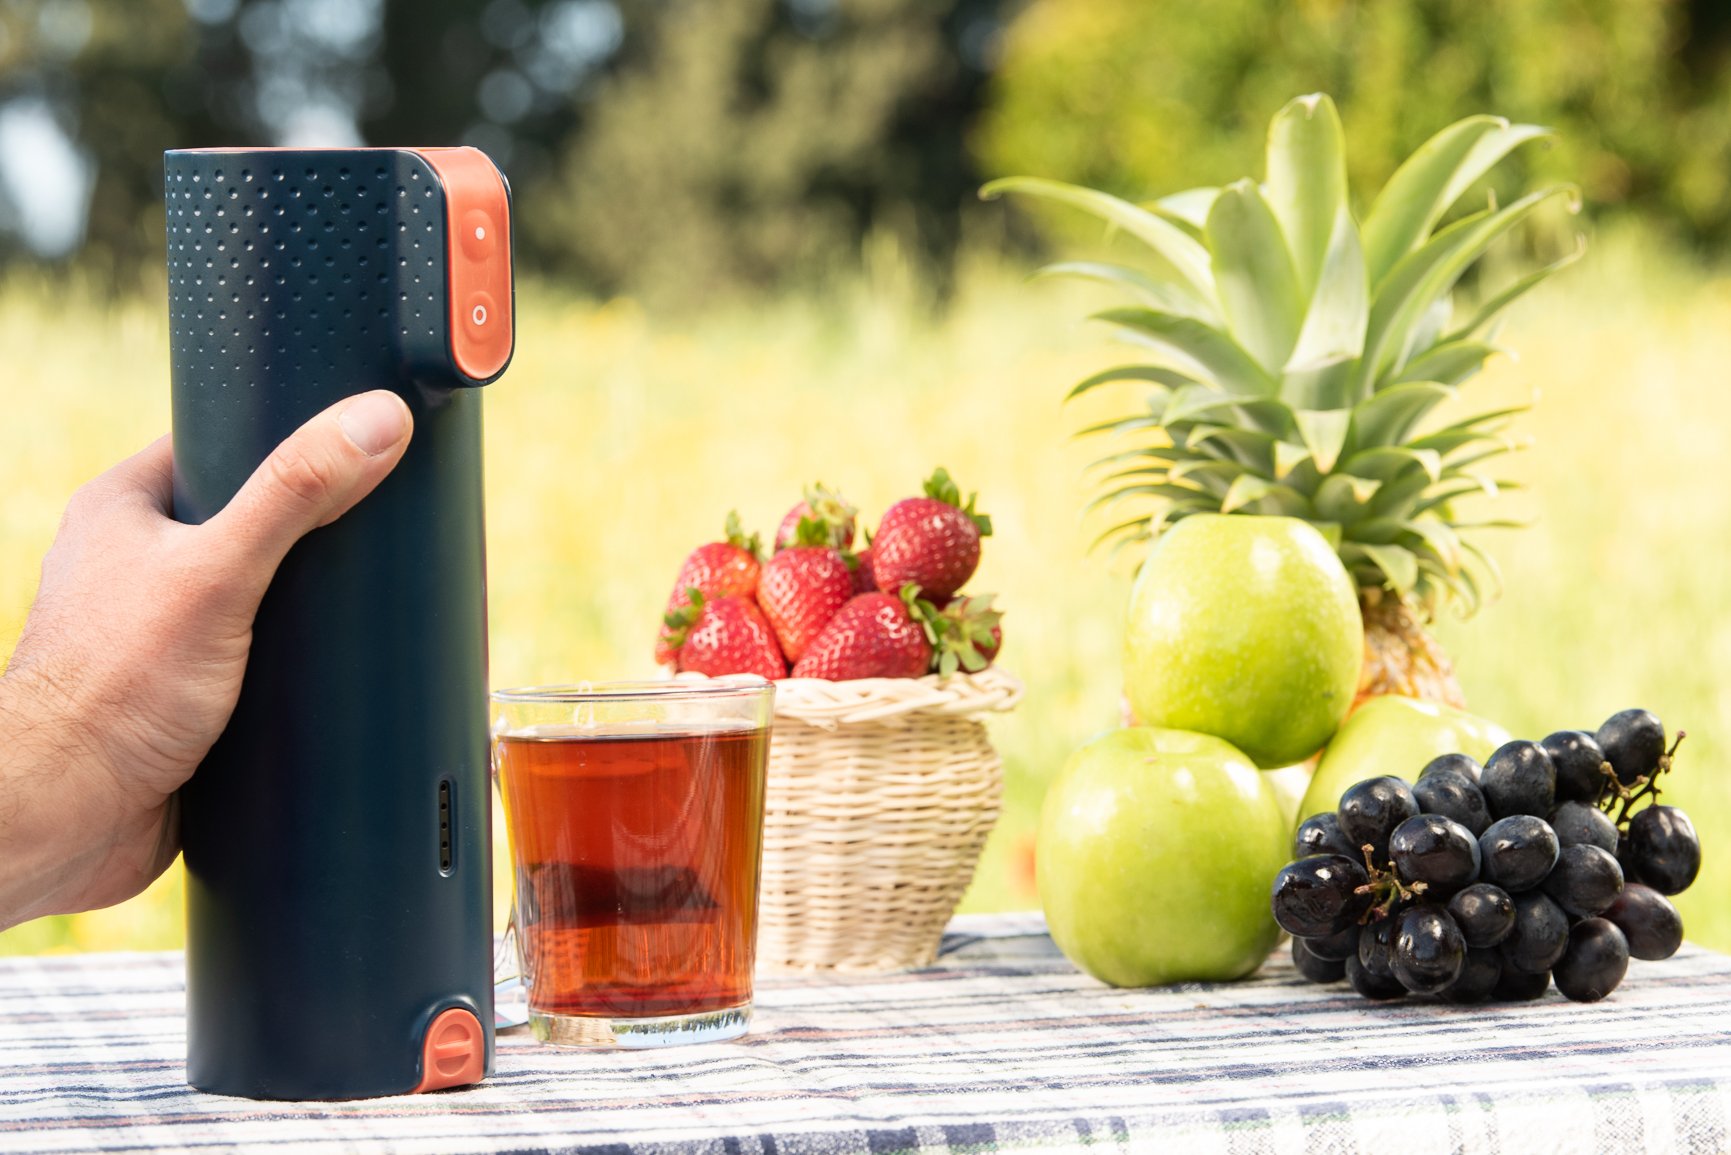 Kimos Thermos, a Rechargeable Self-heating Thermos Launched